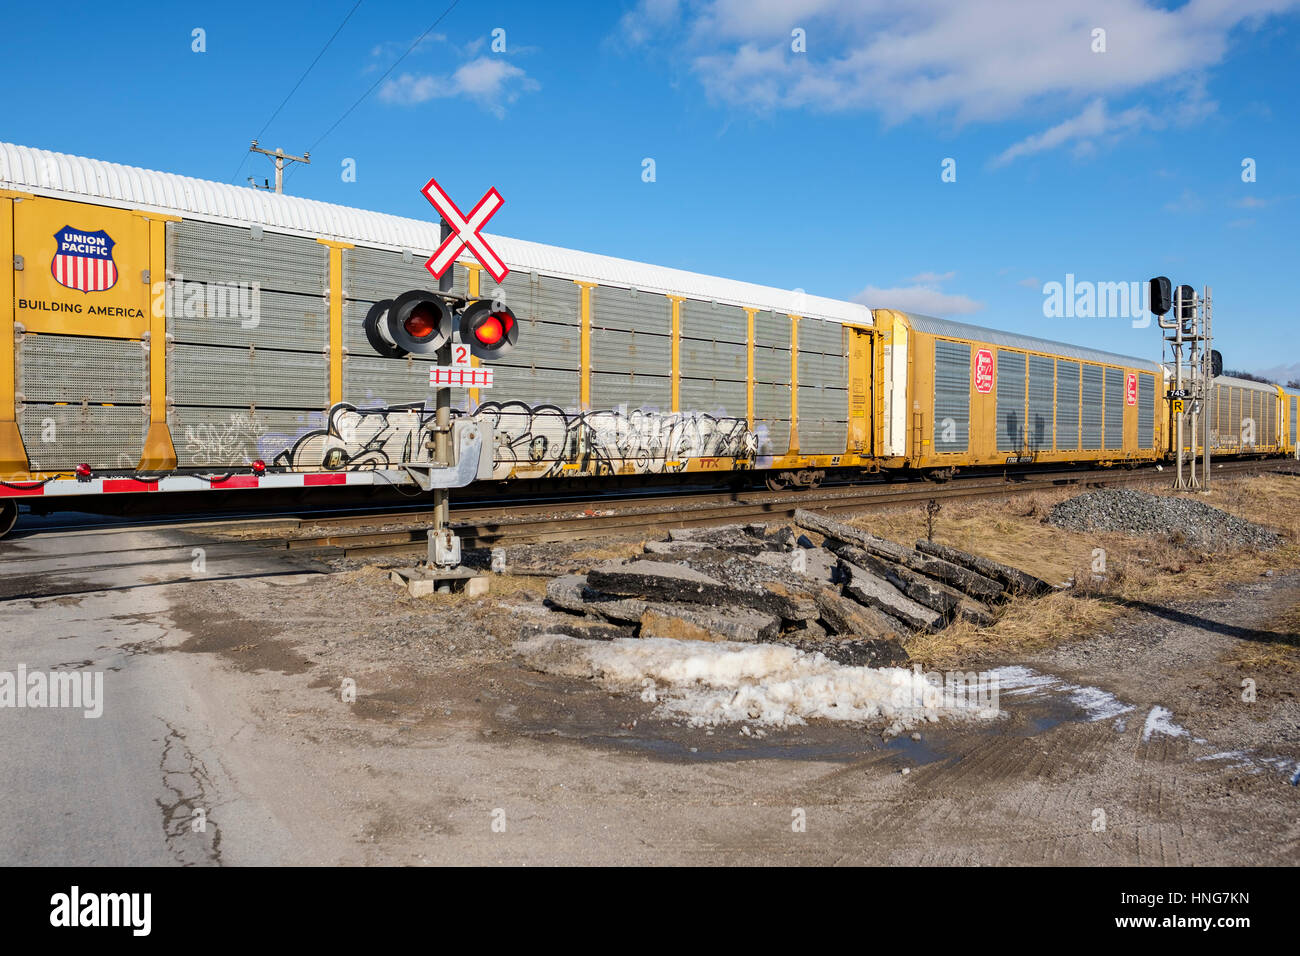 Freight cars passing through a railway level crossing during the day in Southwest Ontario, Canada. Stock Photo